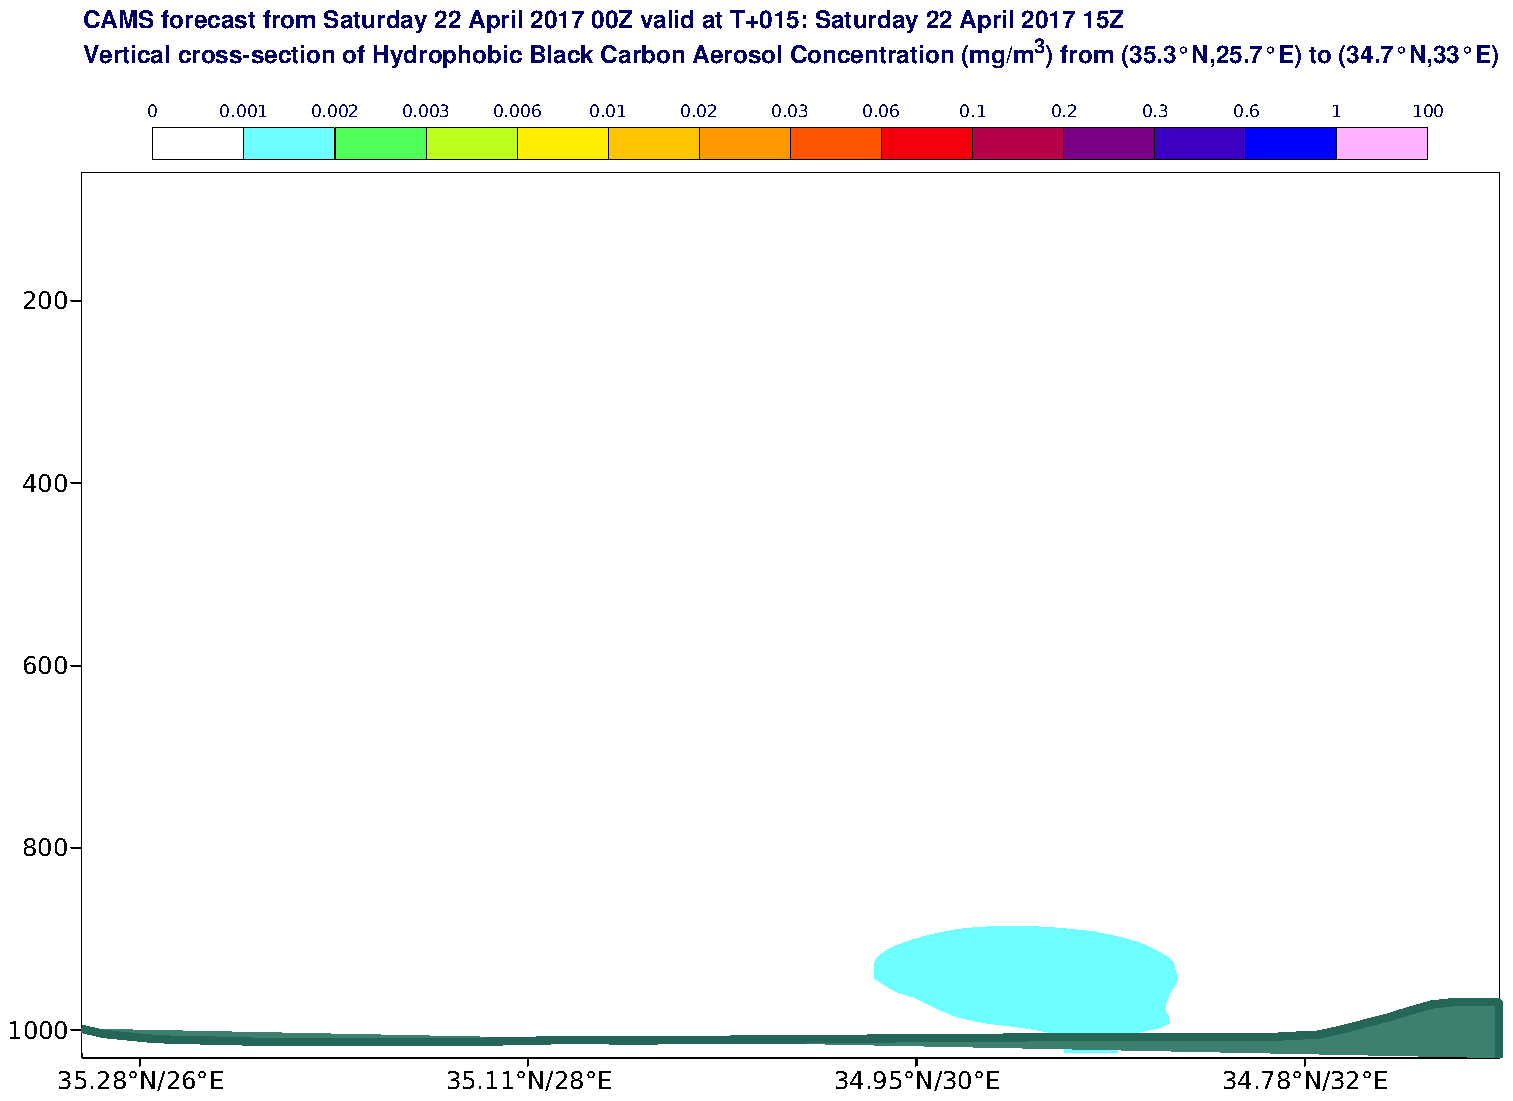 Vertical cross-section of Hydrophobic Black Carbon Aerosol Concentration (mg/m3) valid at T15 - 2017-04-22 15:00